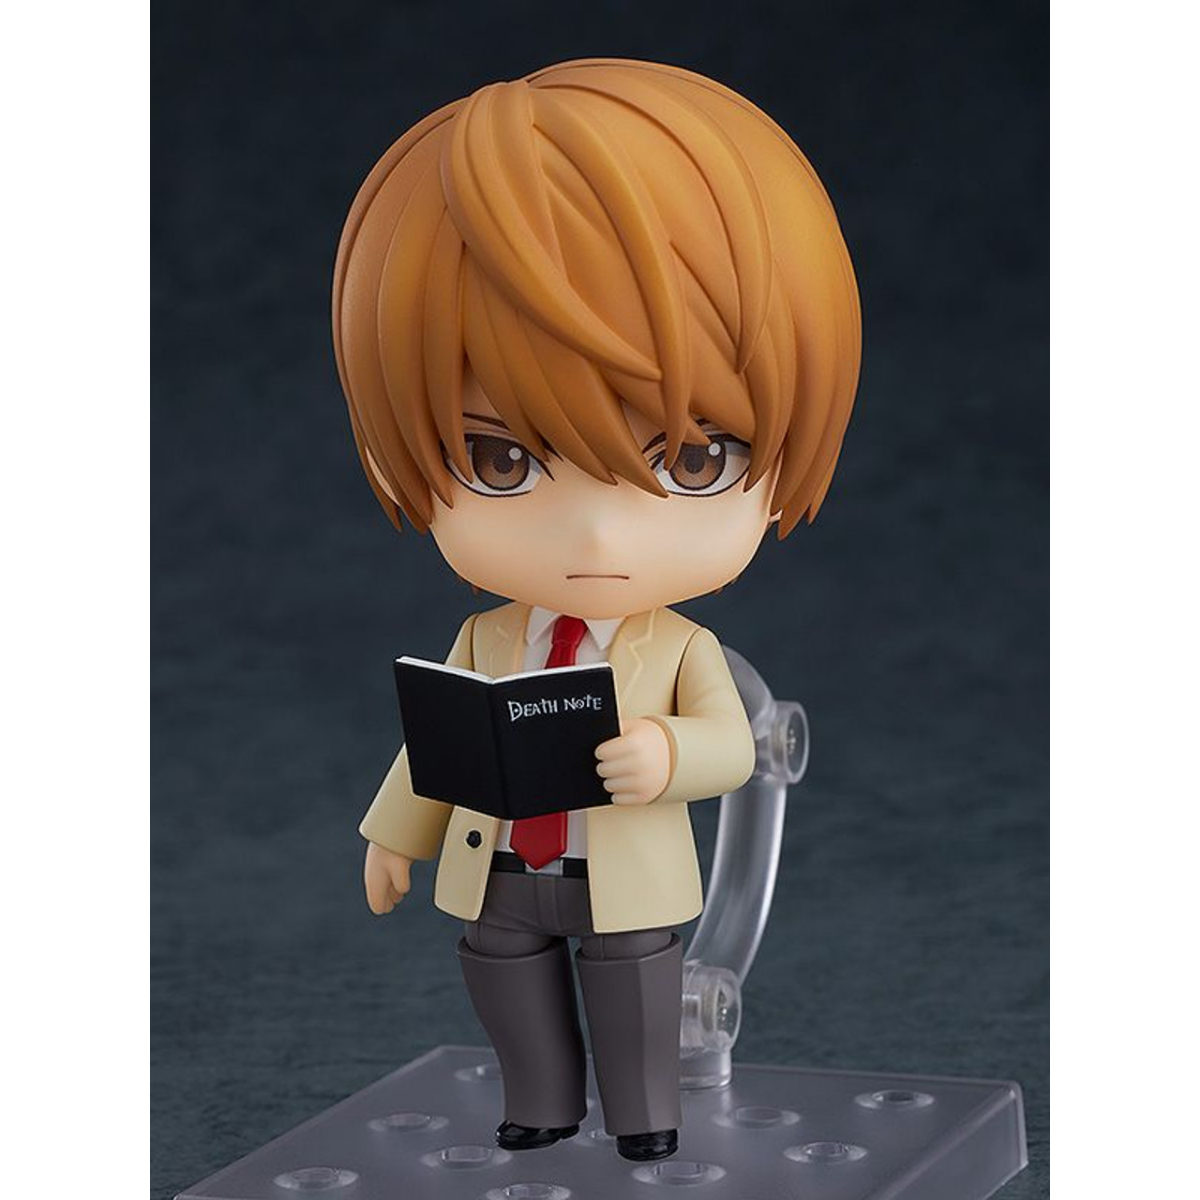 Death Note Nendoroid [1160] &quot;Light Yagami 2.0&quot; (Re-Run)-Good Smile Company-Ace Cards &amp; Collectibles